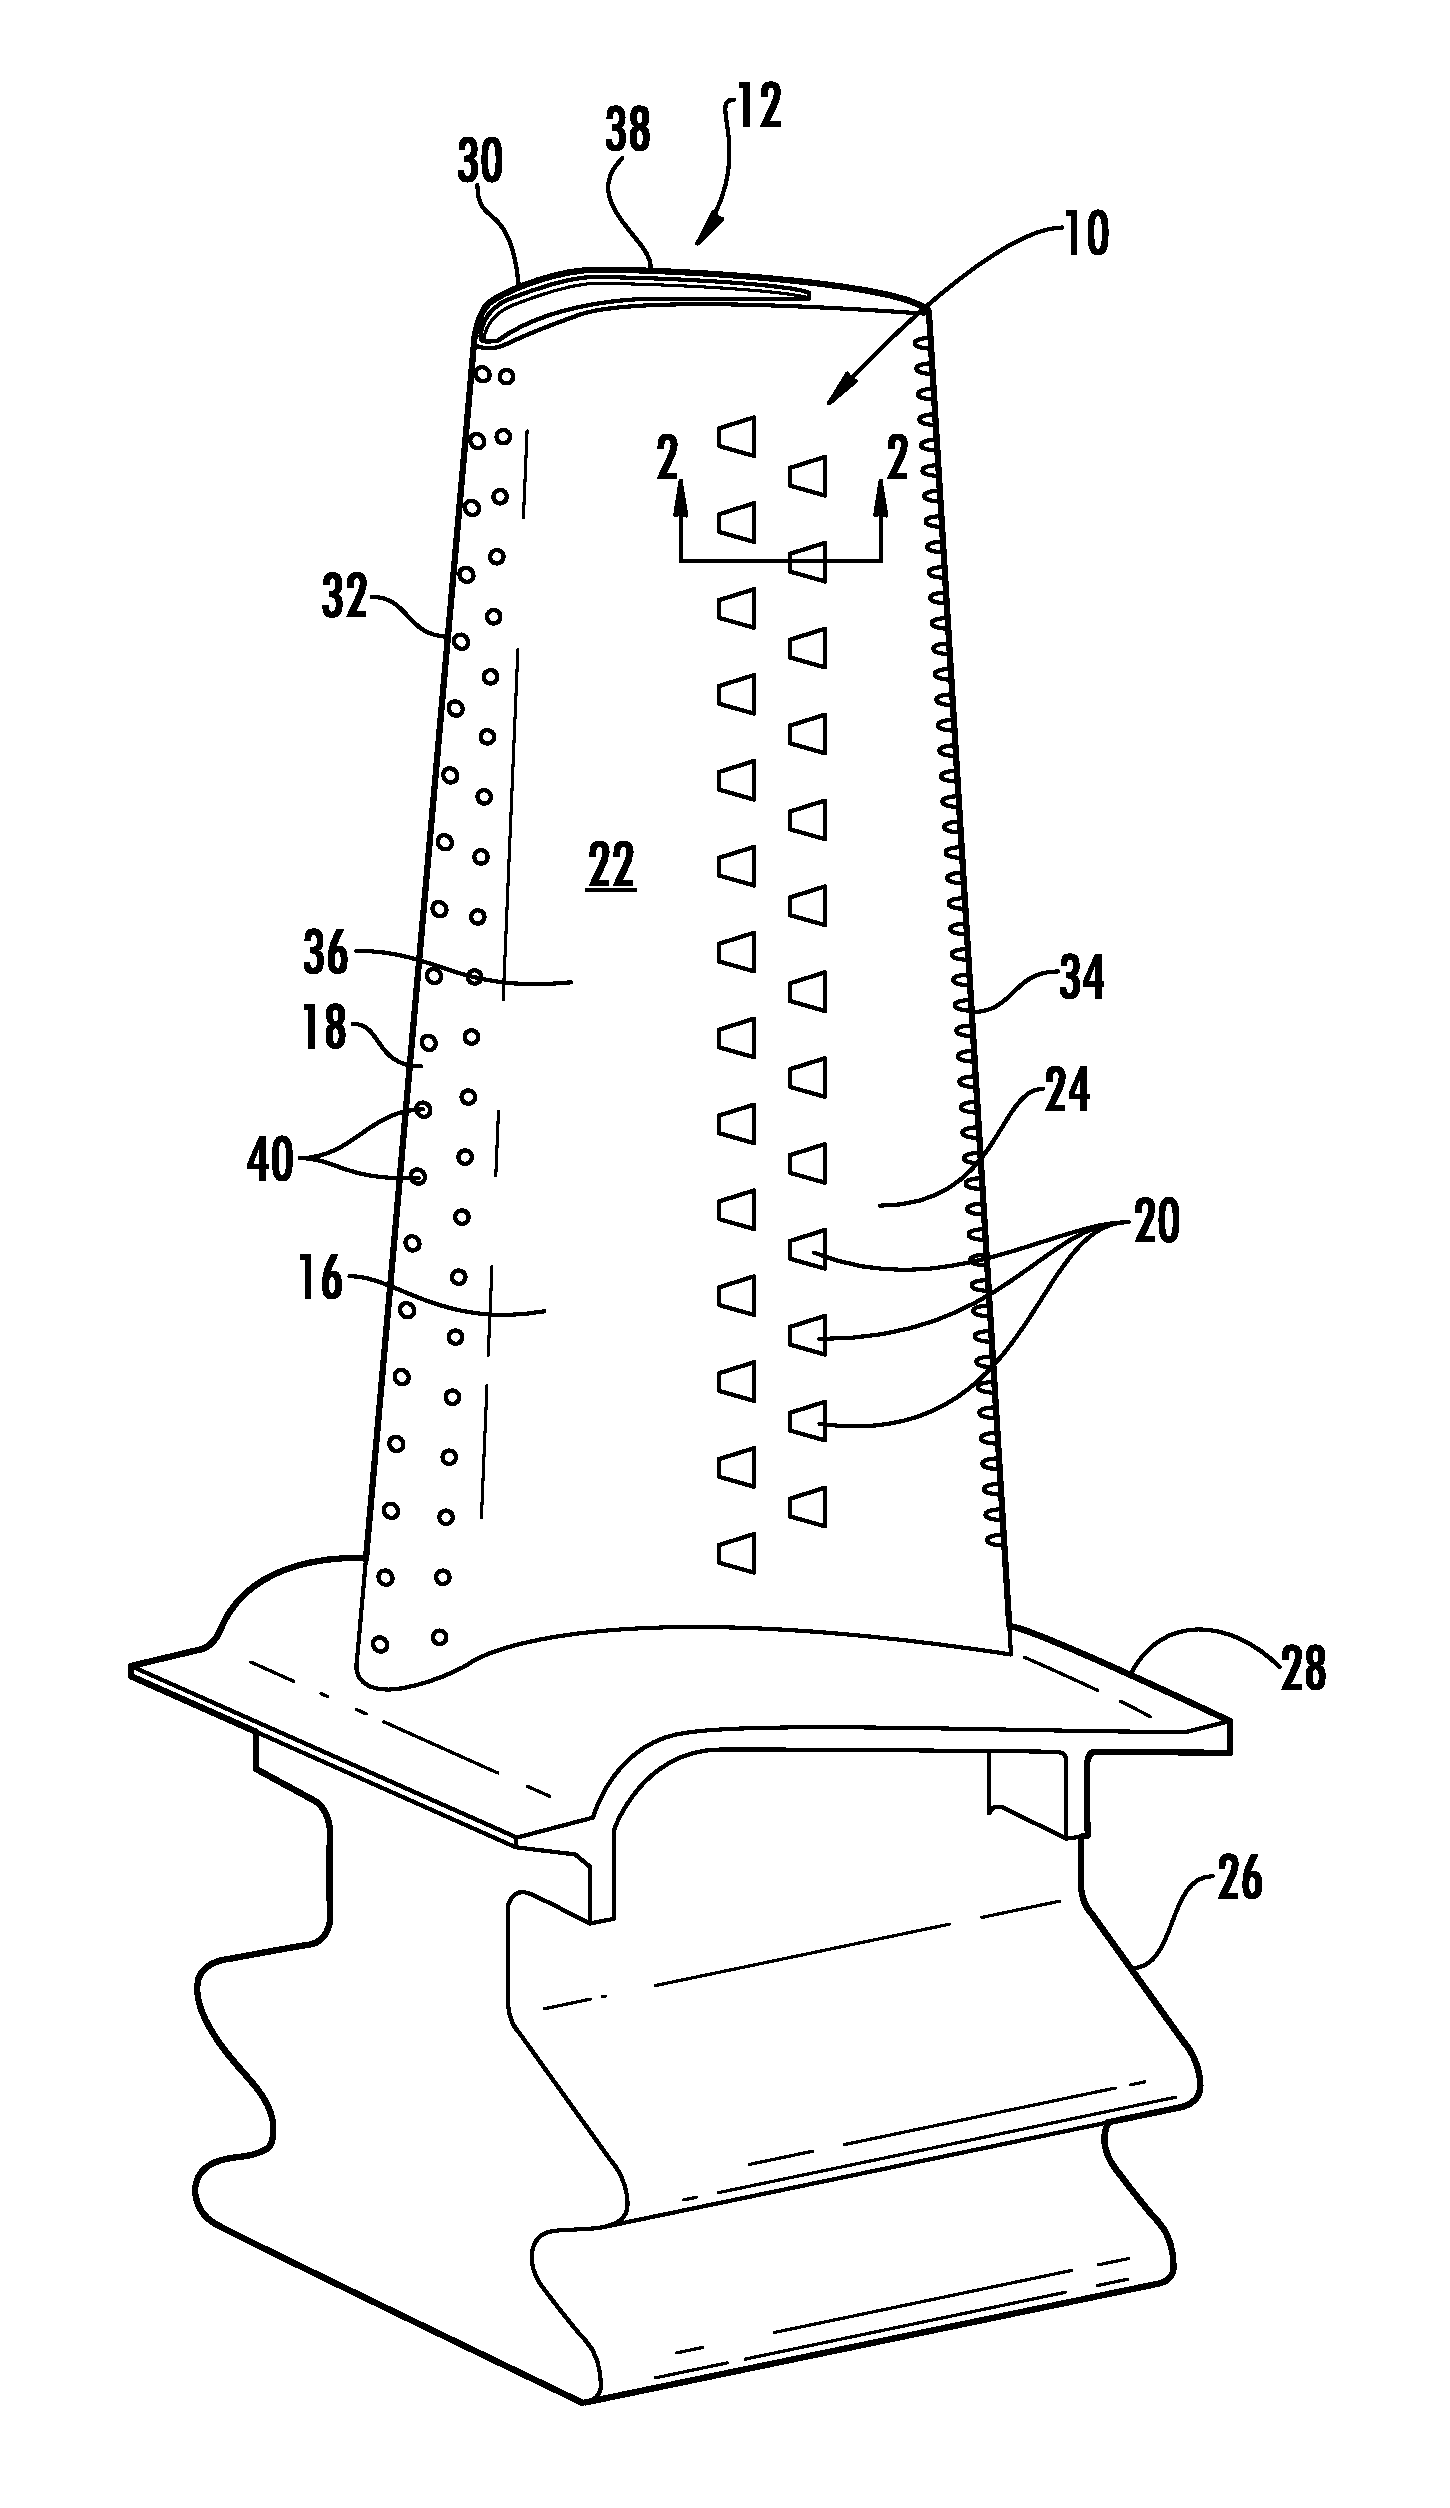 Turbine Airfoil Cooling System with Divergent Film Cooling Hole